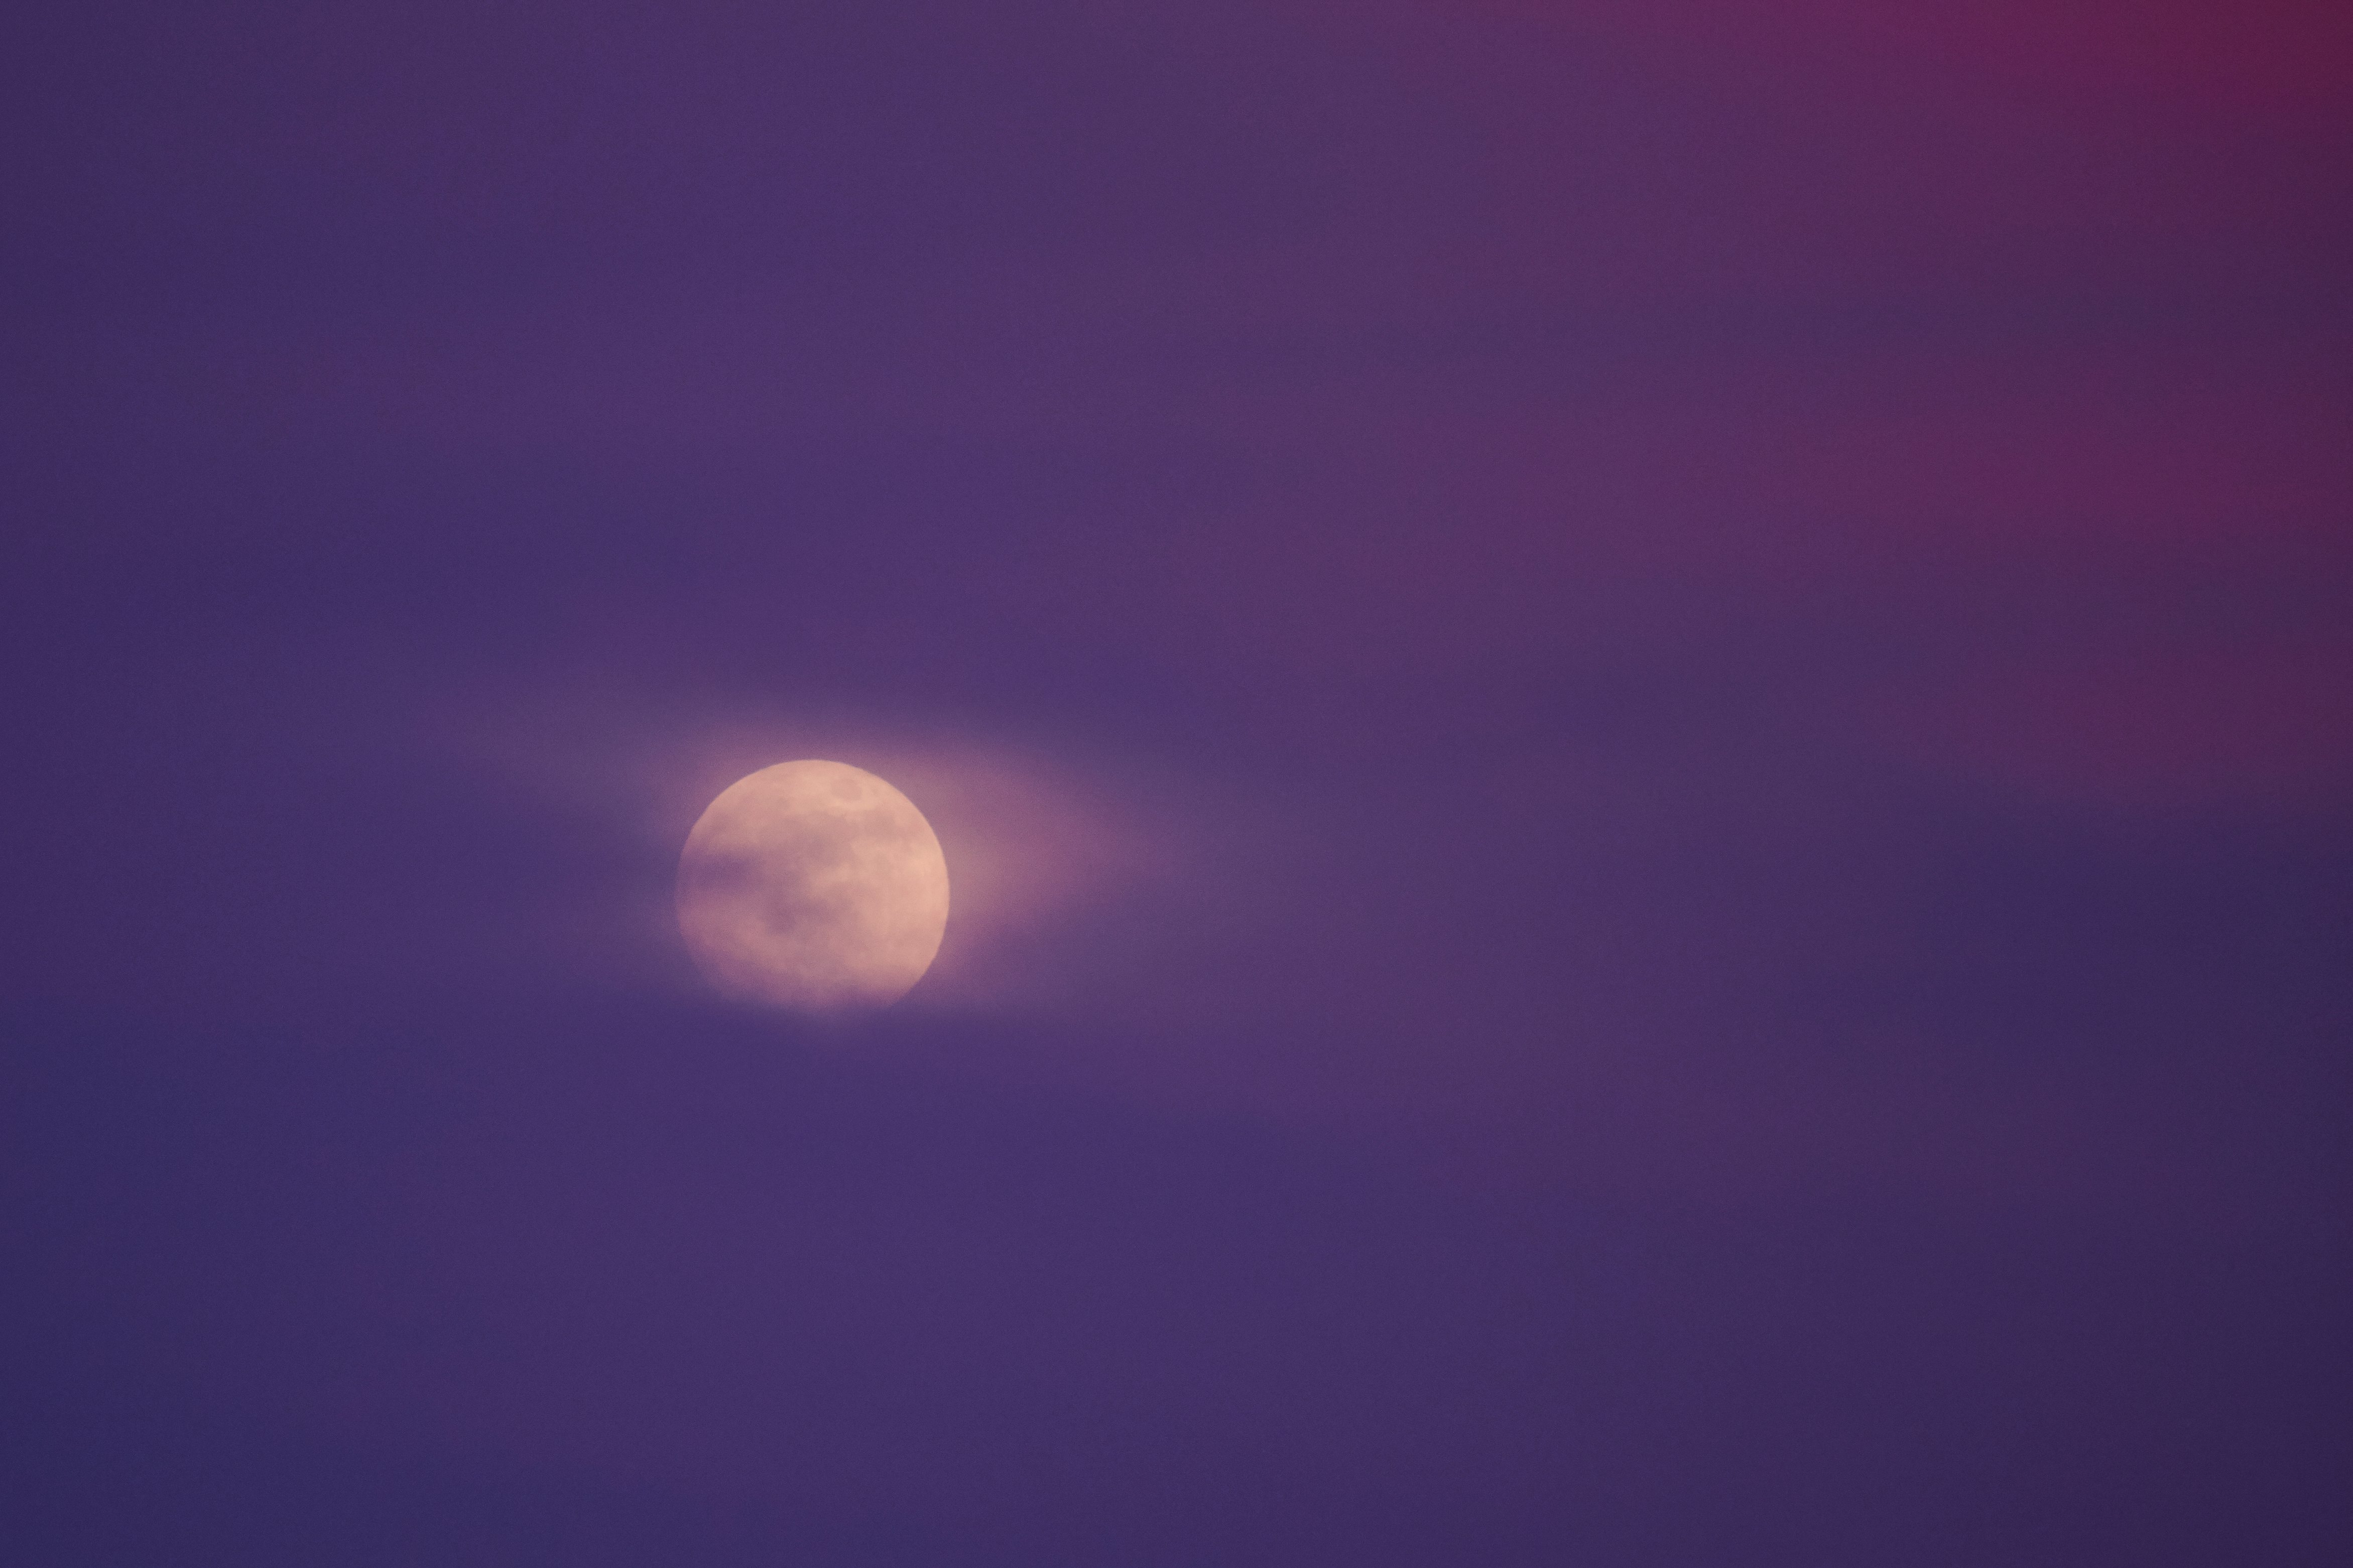 How the June 14 Strawberry Supermoon Will Impact You